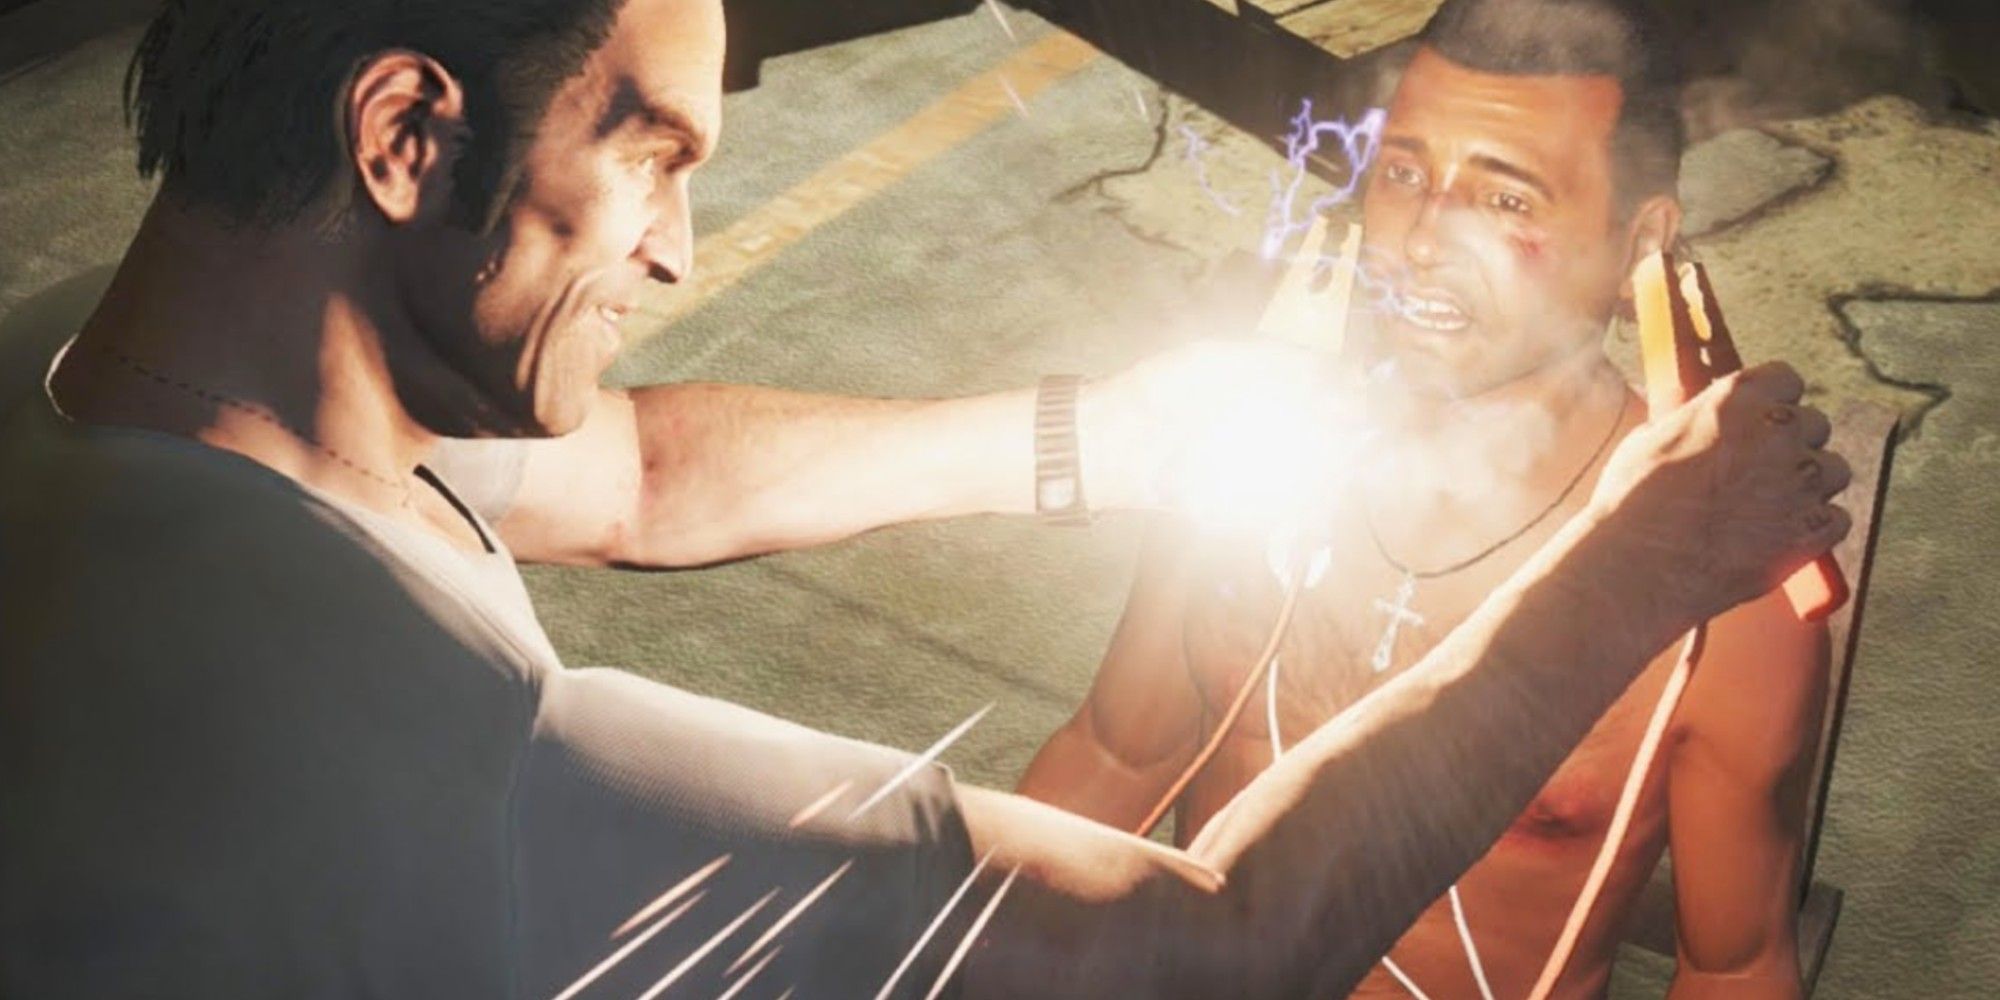 GTA 5’s Torture Scene Is Entirely Unnecessary